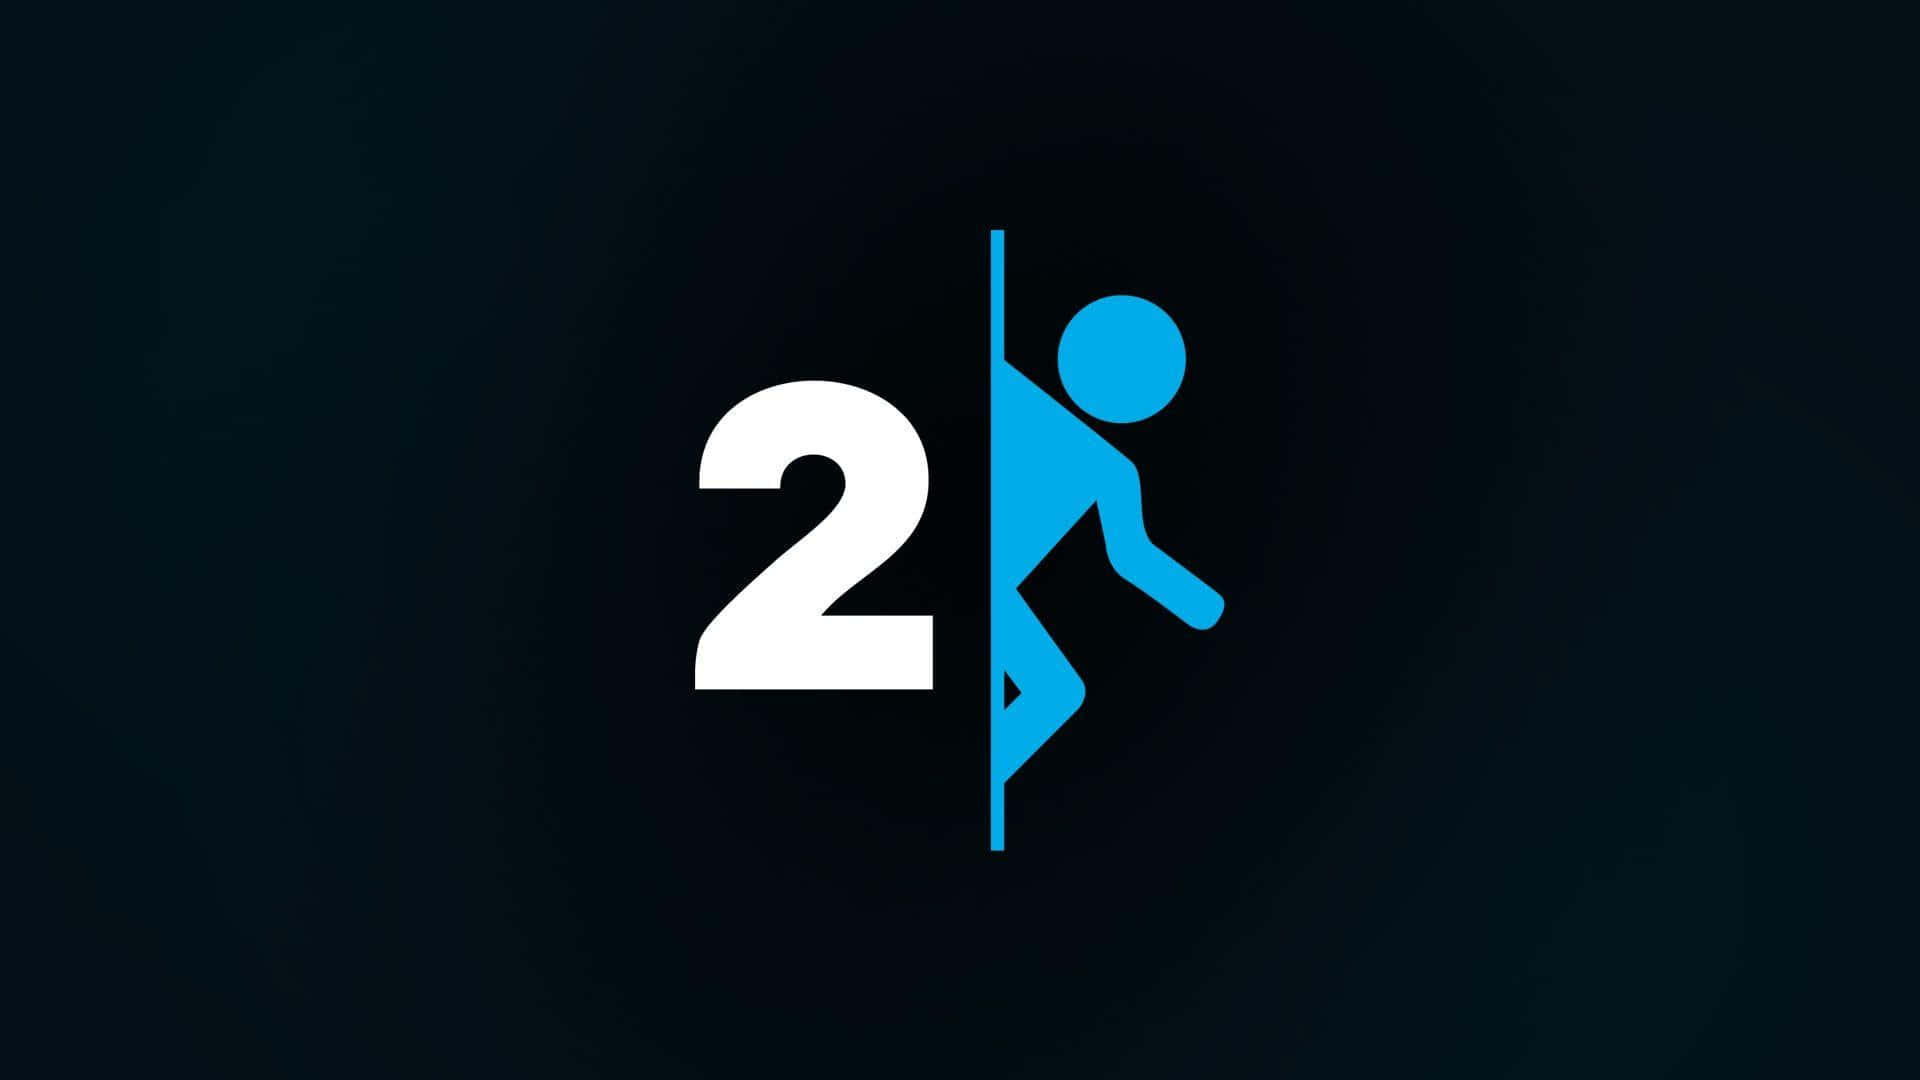 A Man Is Running Through A Door With The Number 2